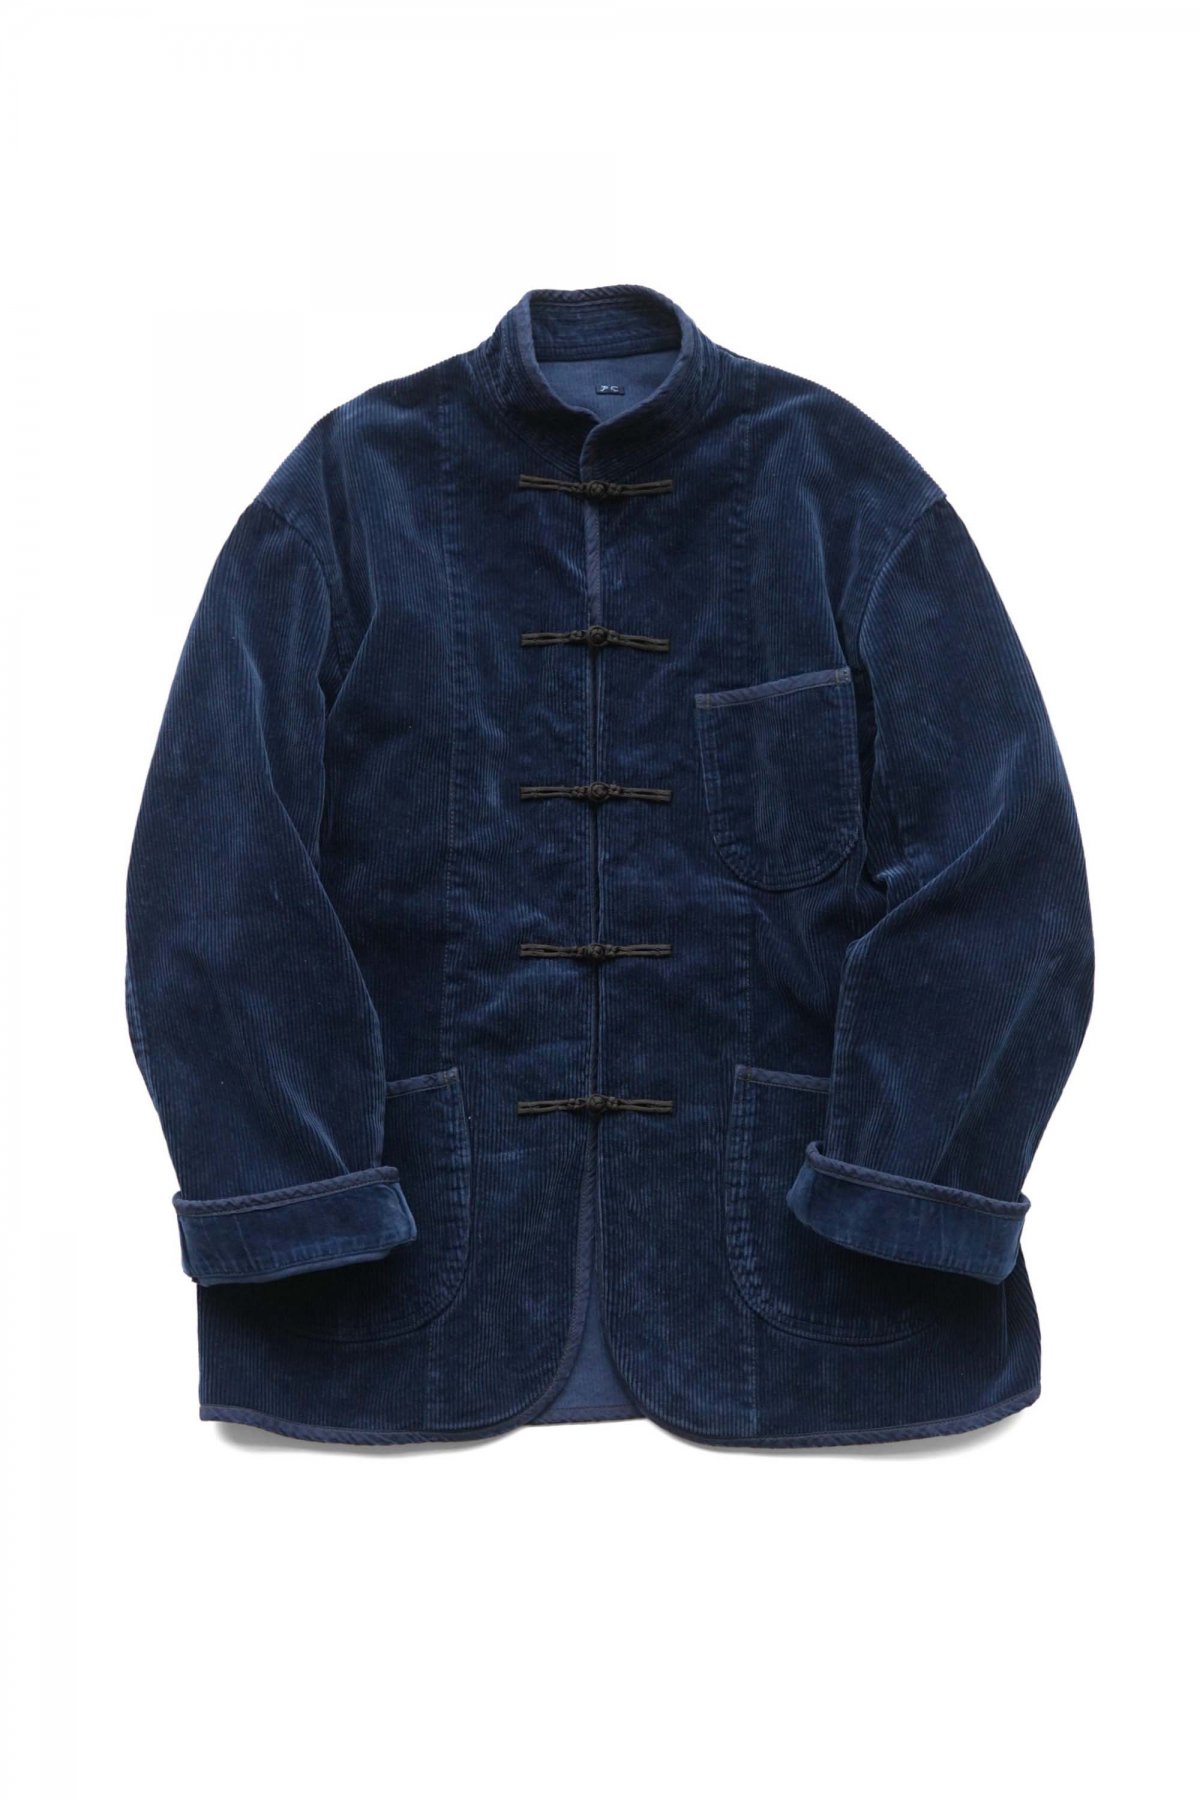 Porter Classic - CORDUROY CHINESE JACKET - WATCH CHAIN ITEM - BLUE 